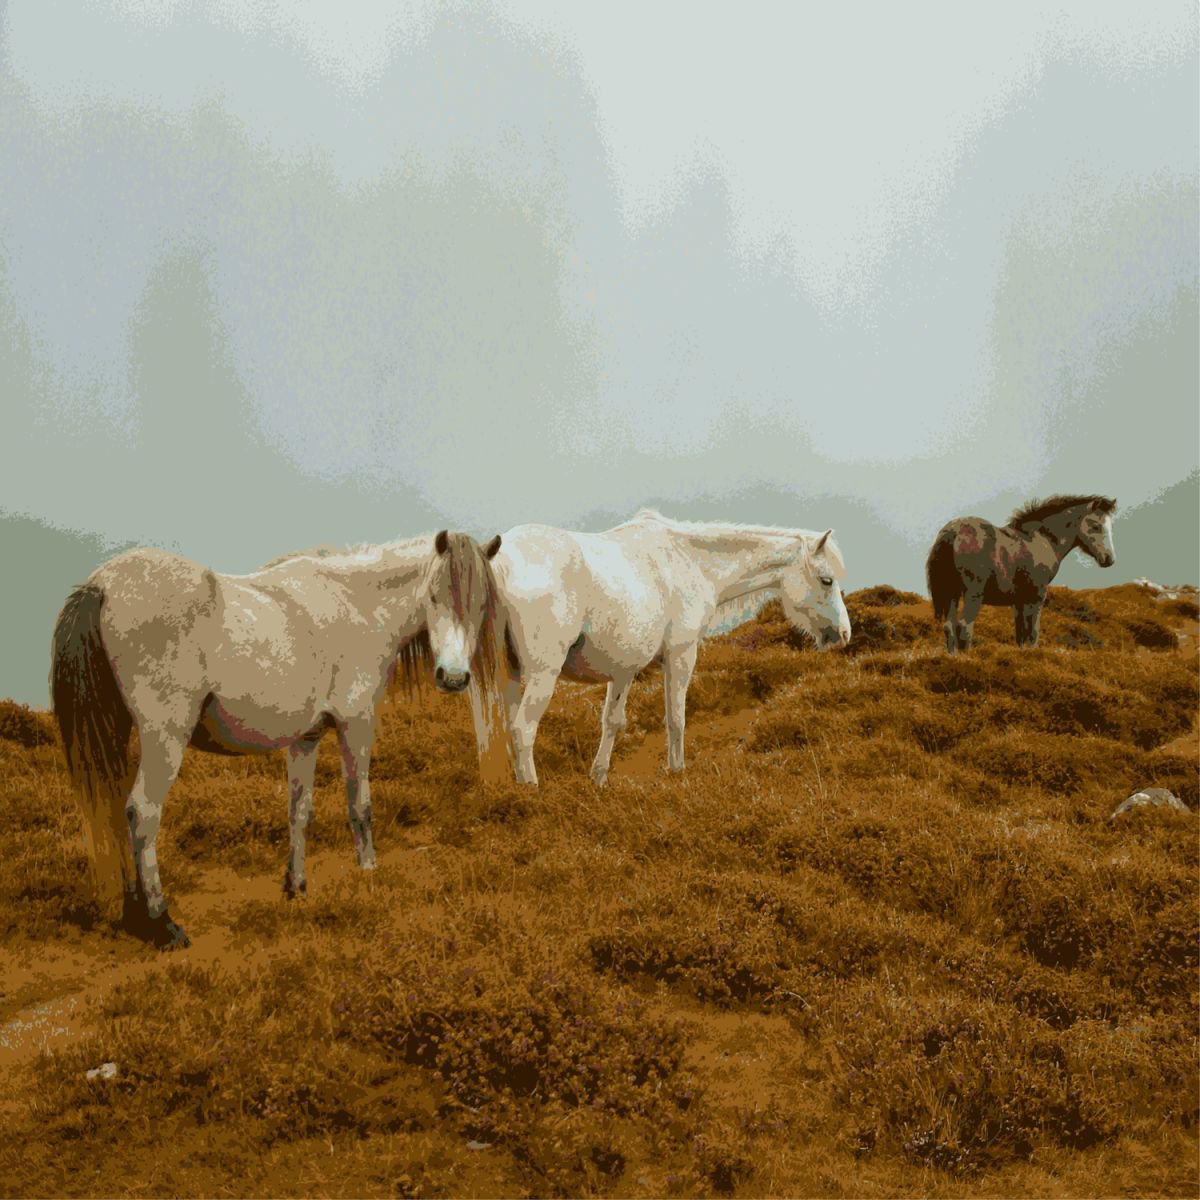 Mountain Ponies #1 by Keith Dodd